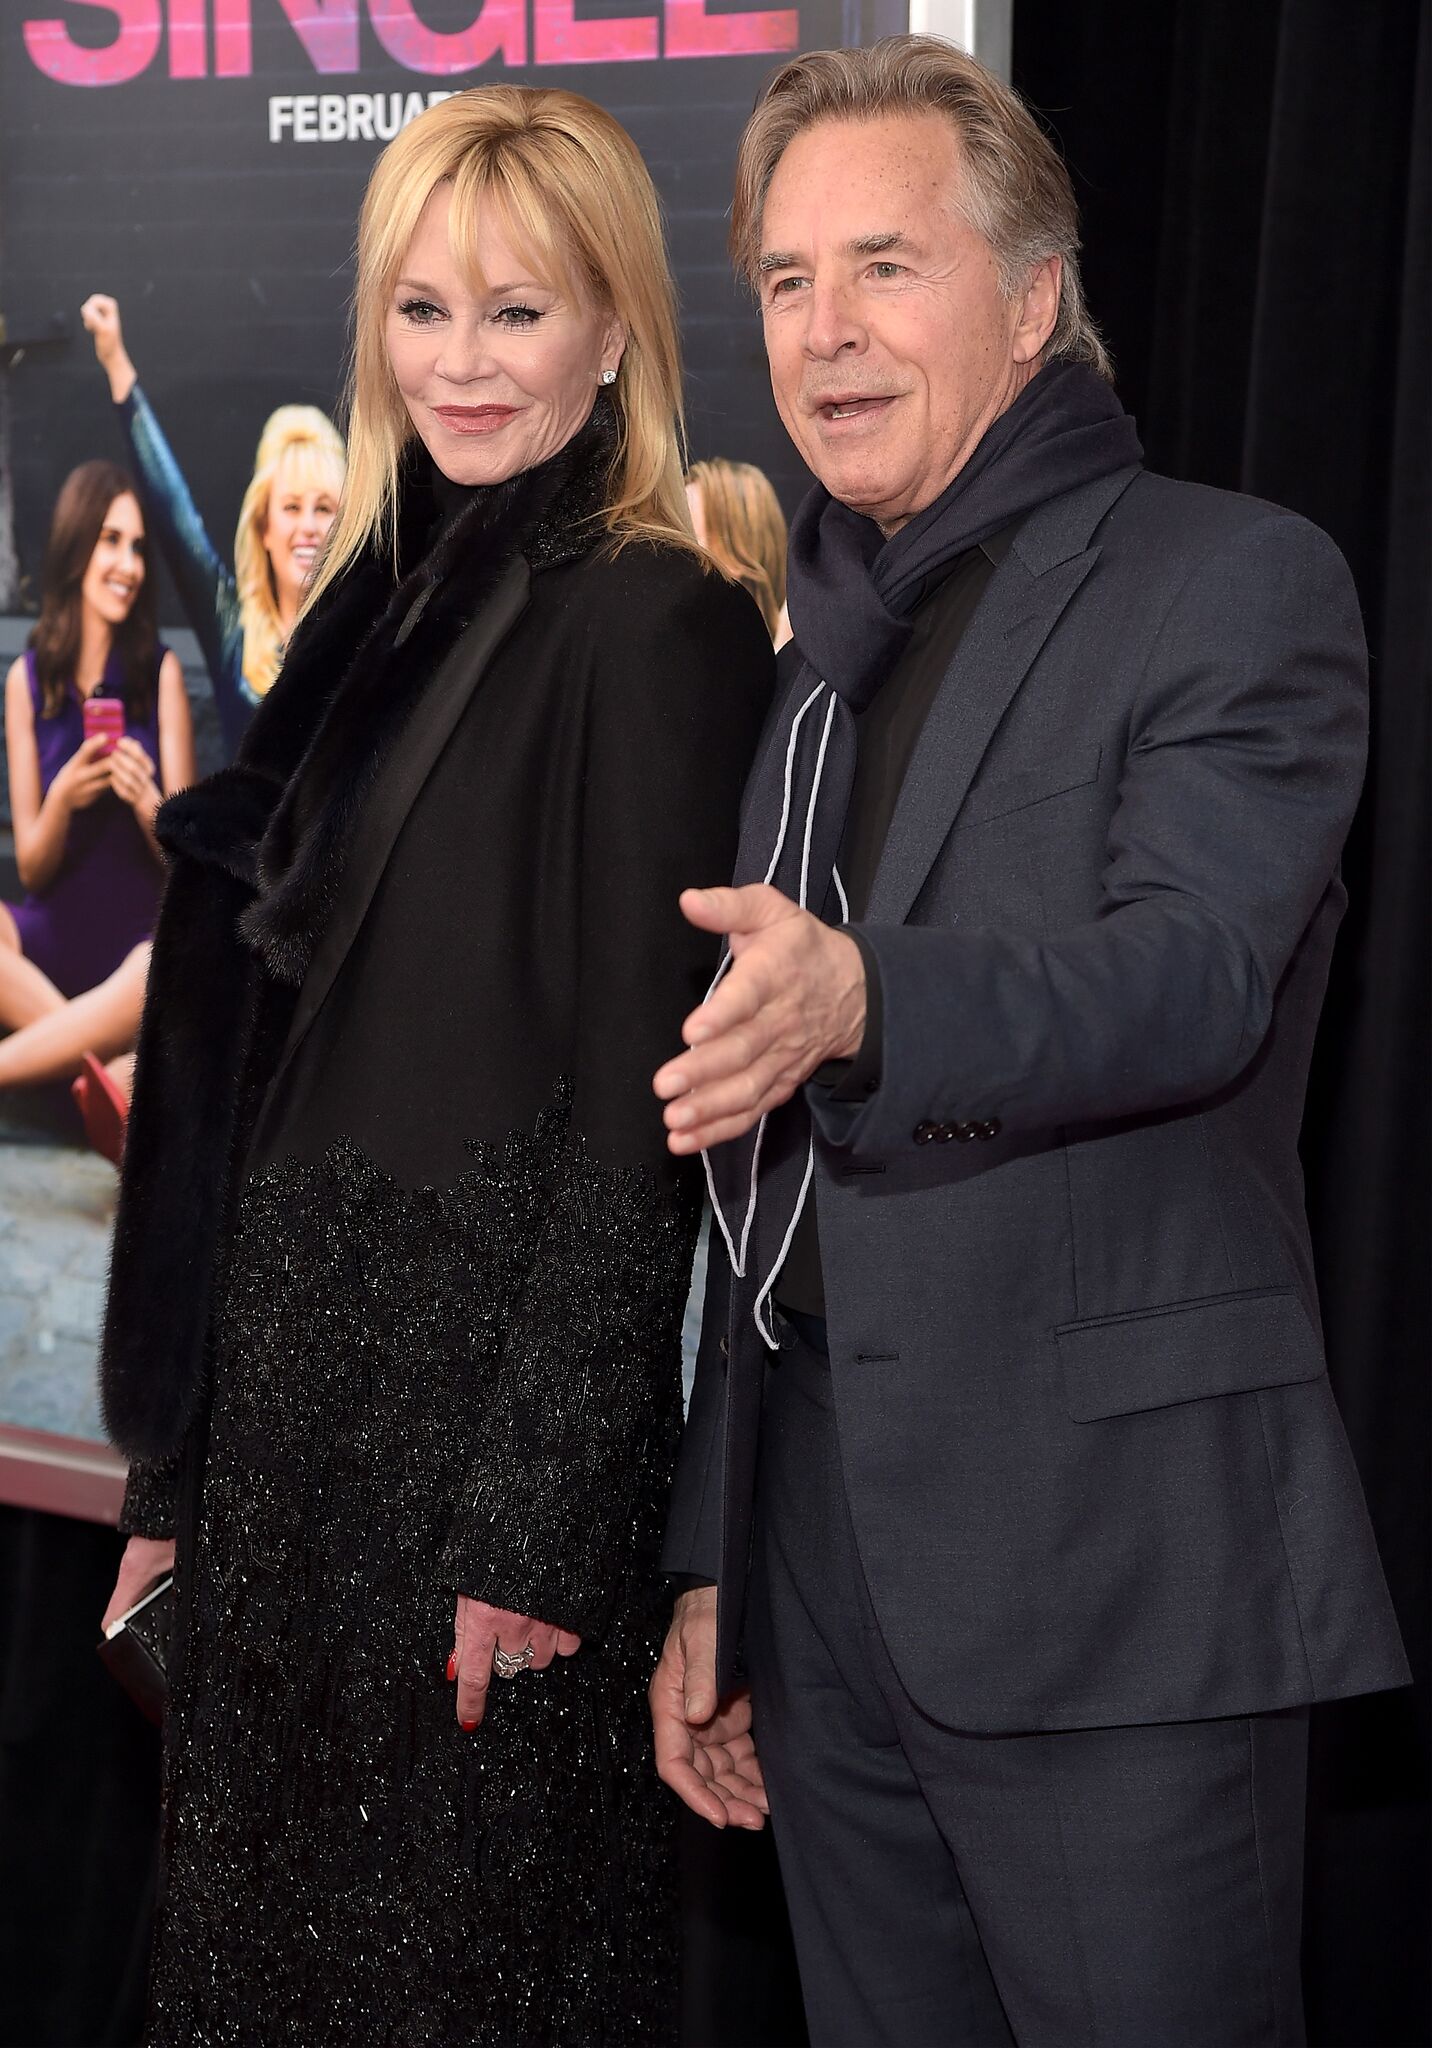 Melanie Griffith and Don Johnson attend the New York premiere of "How To Be Single." | Source: Getty Images 